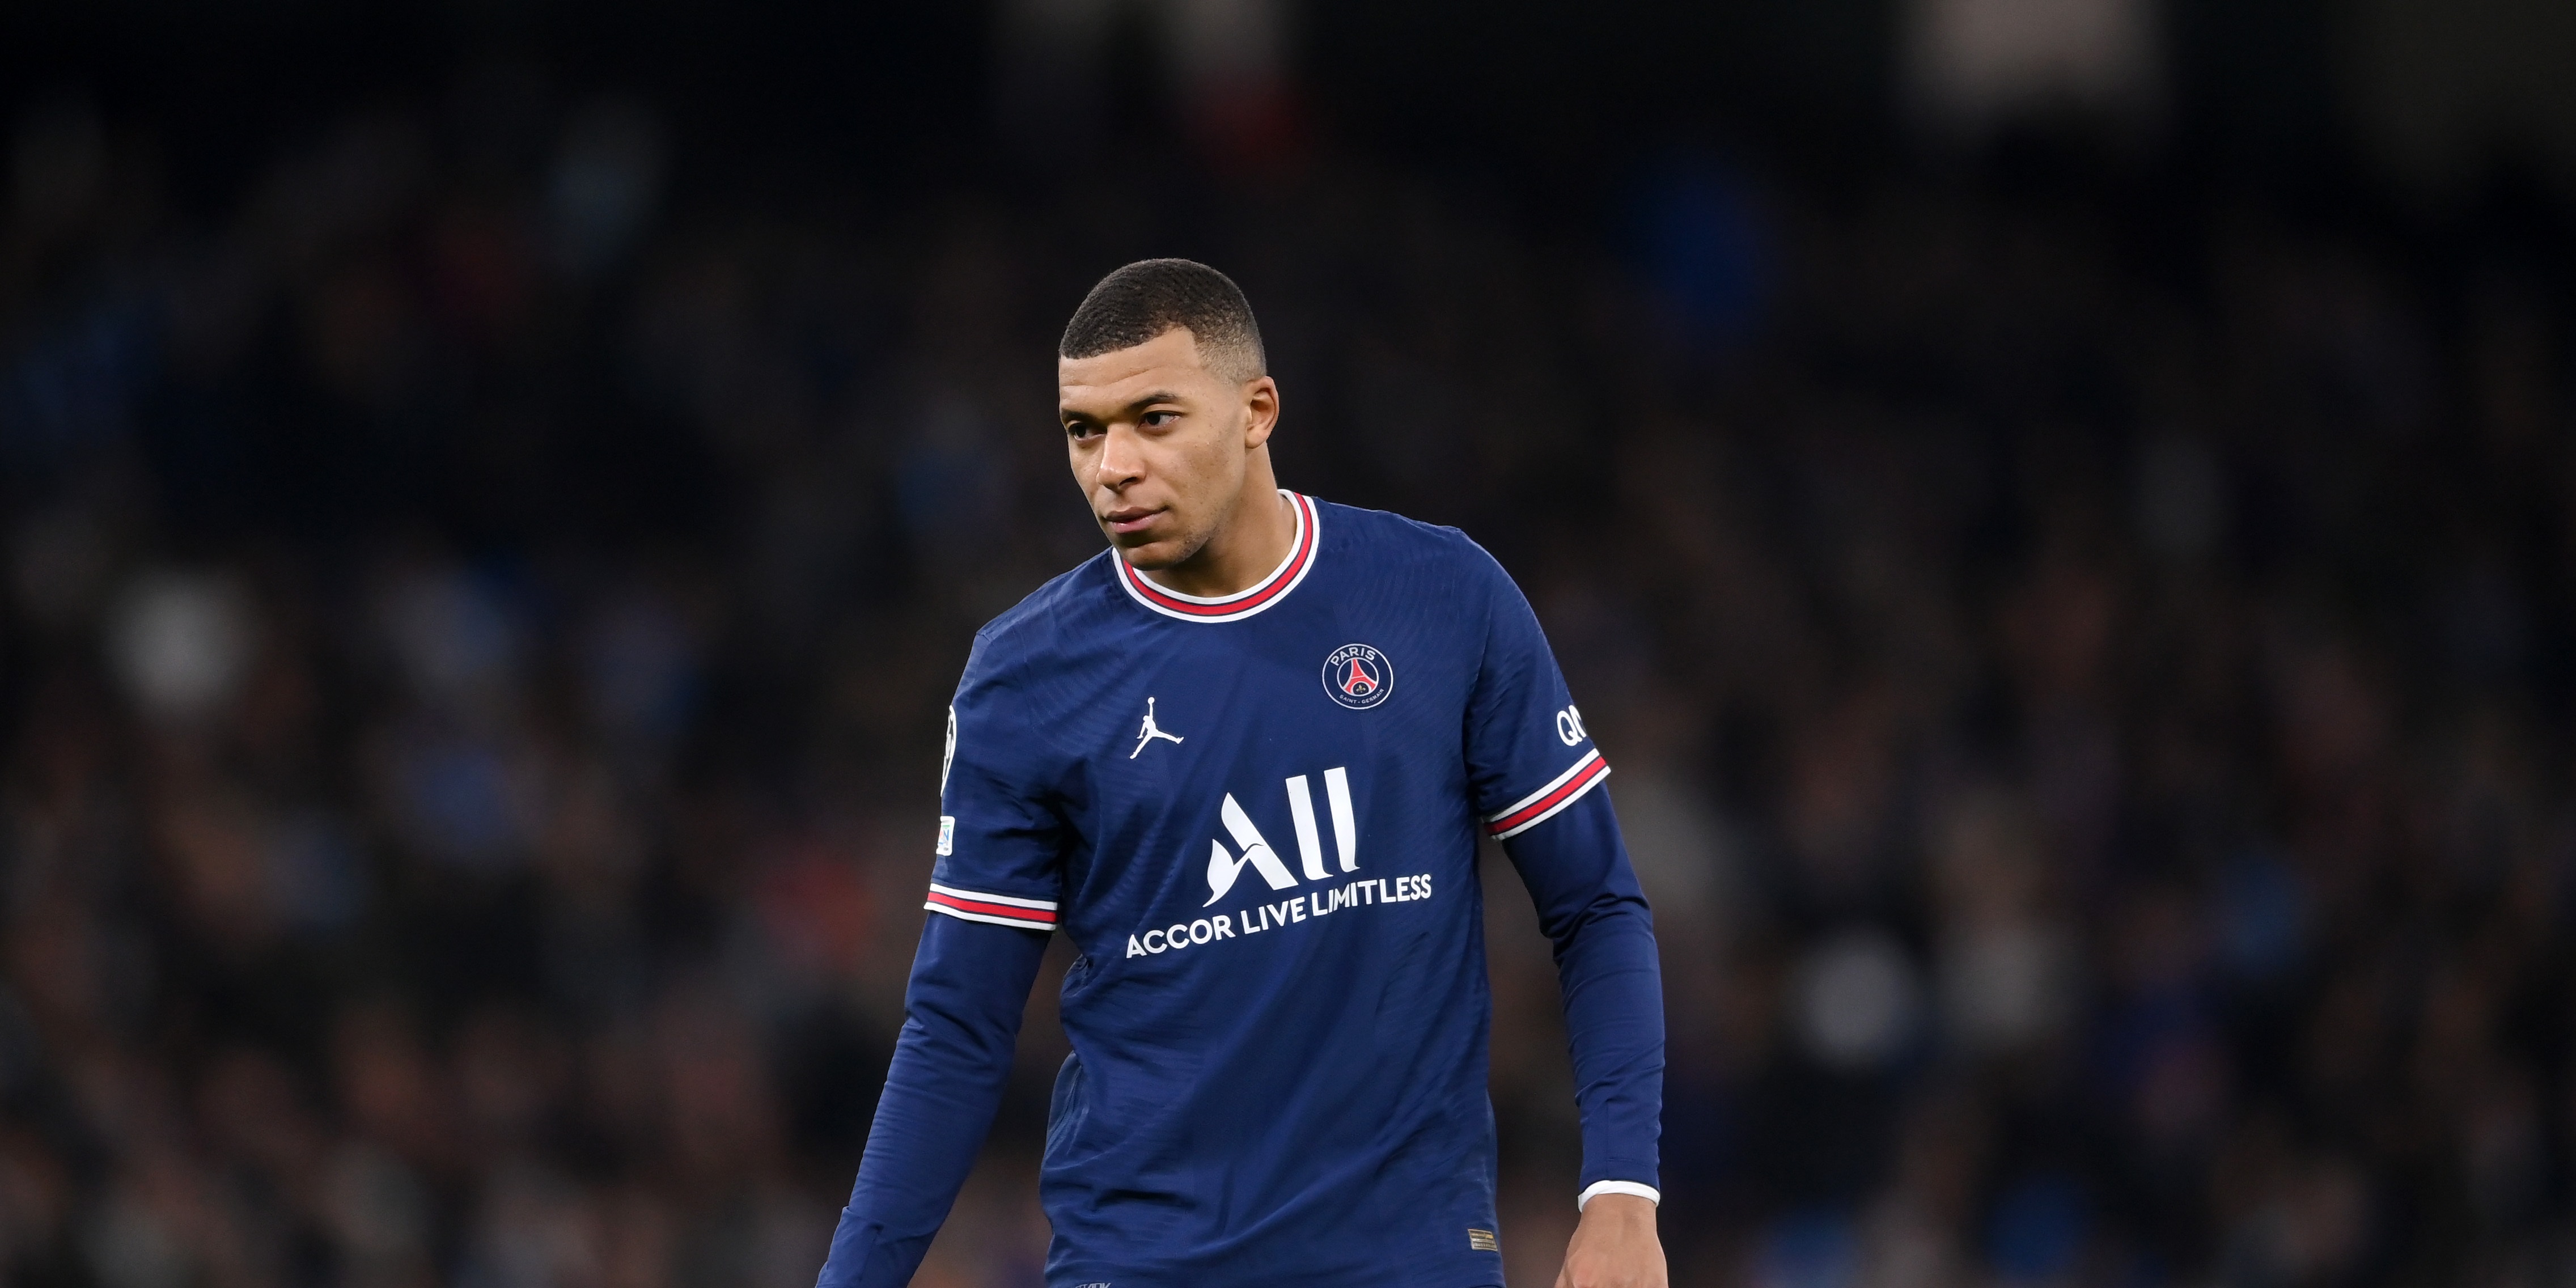 ‘In my life’ – Liverpool-linked Kylian Mbappe rules out move to Premier League outfit